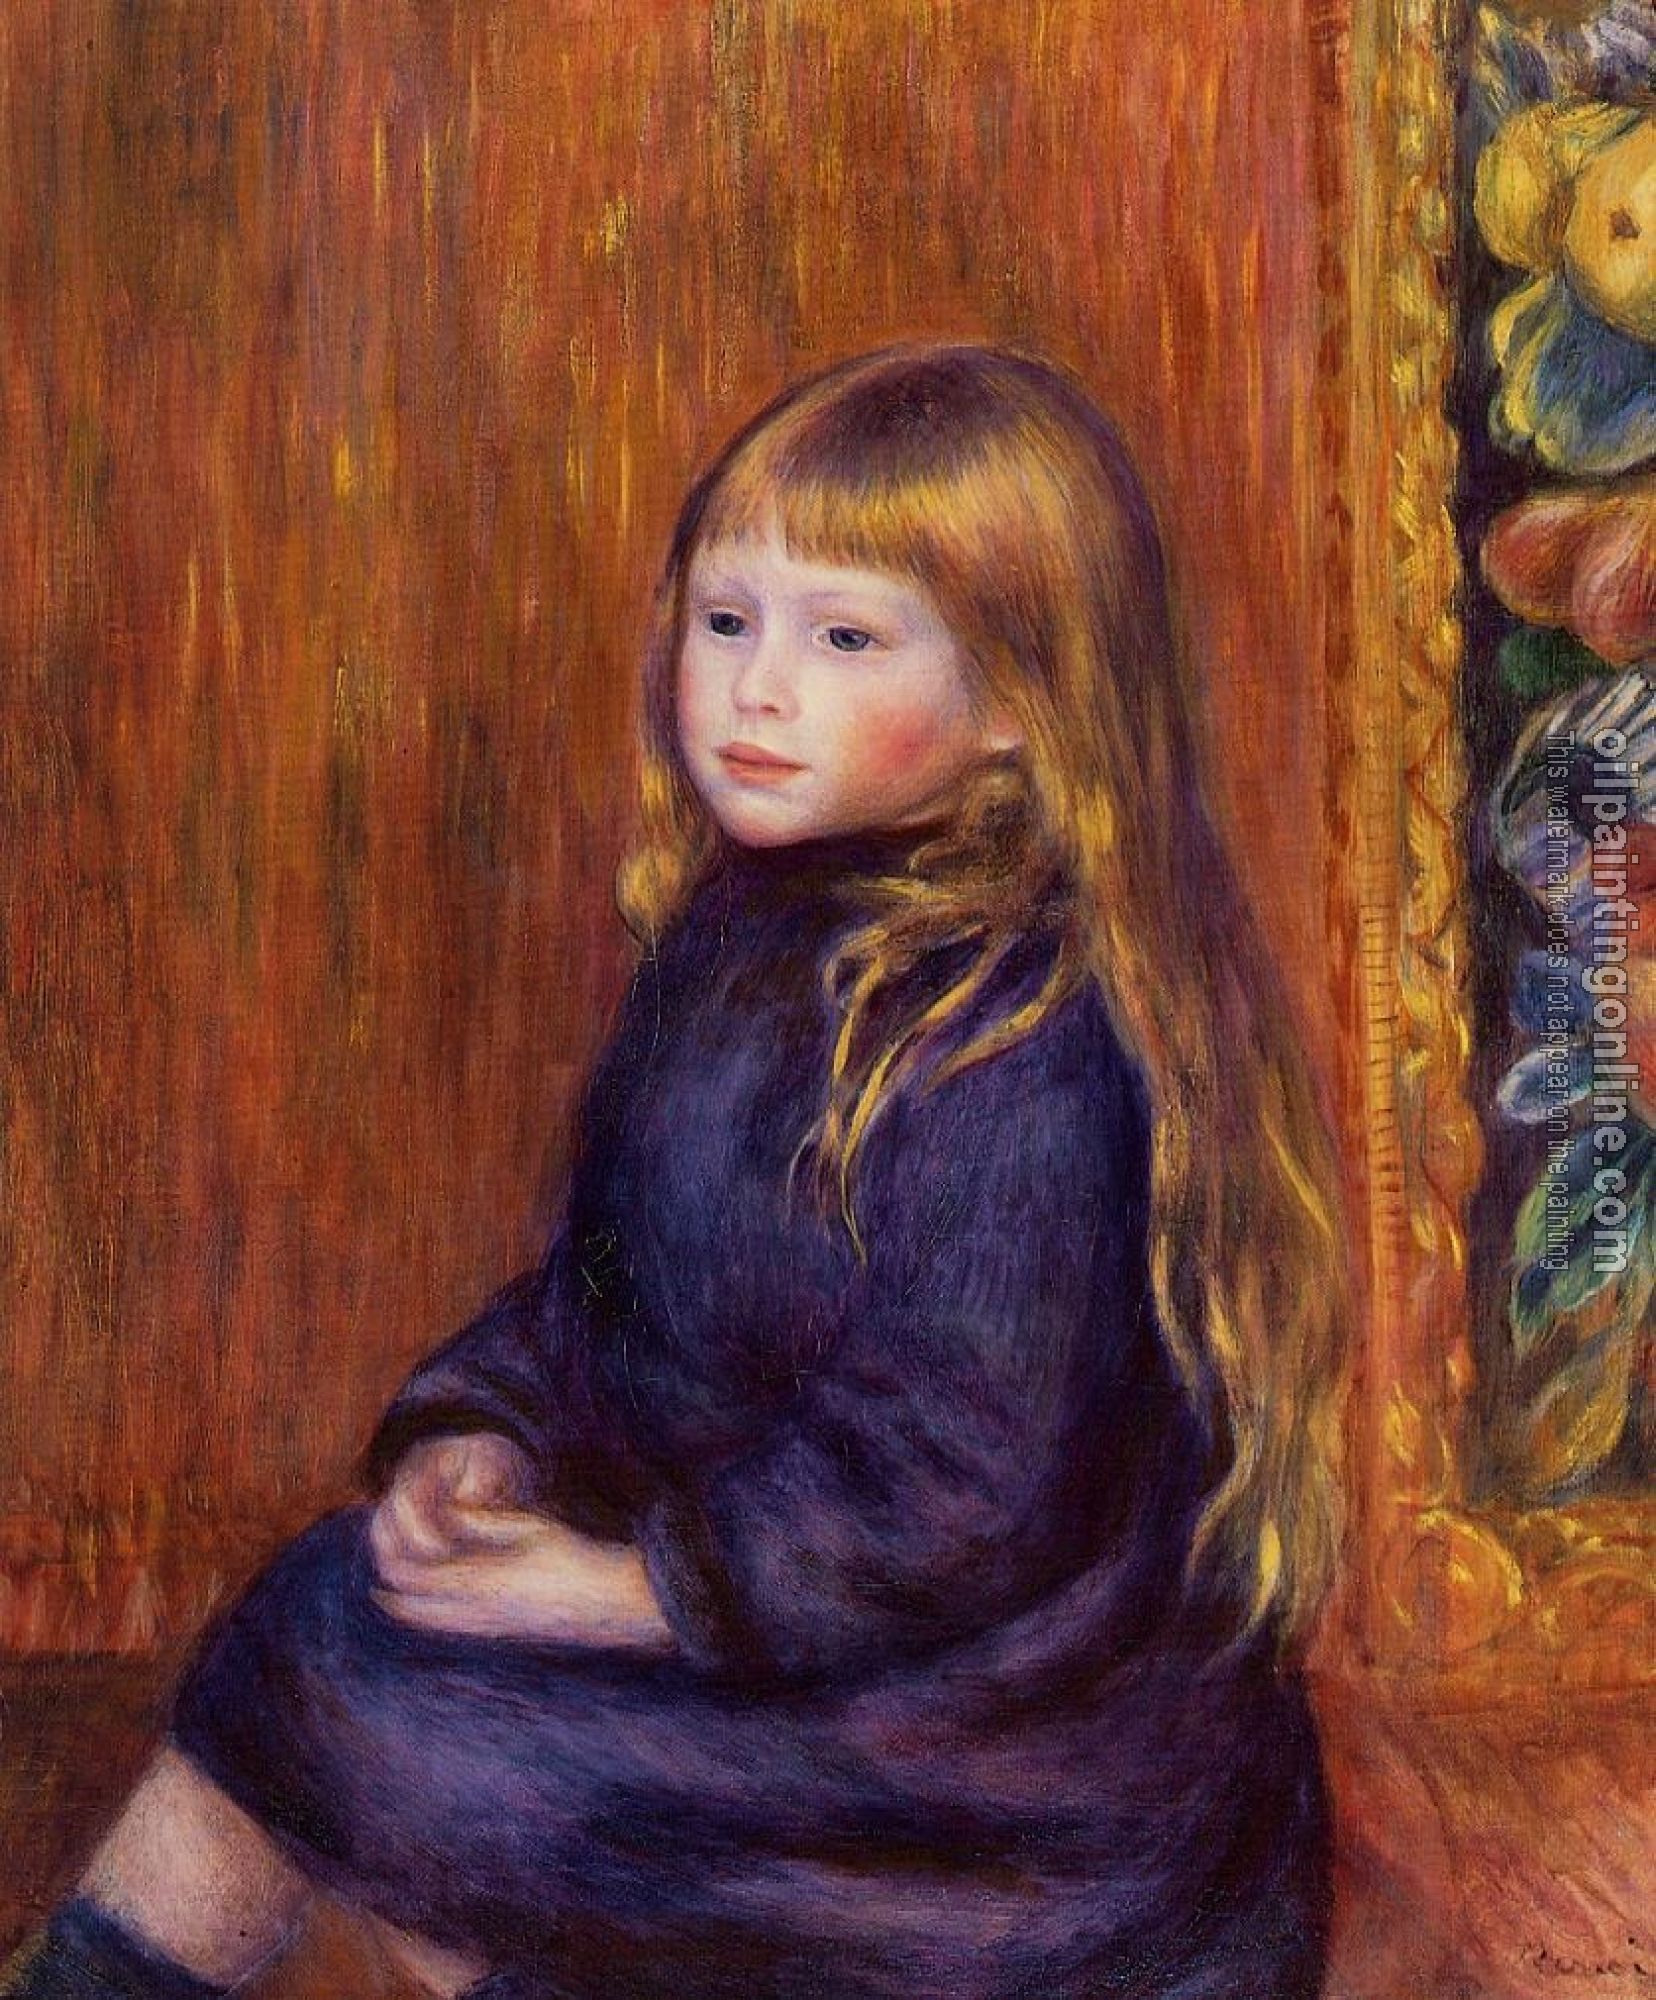 Renoir, Pierre Auguste - Seated Child in a Blue Dress